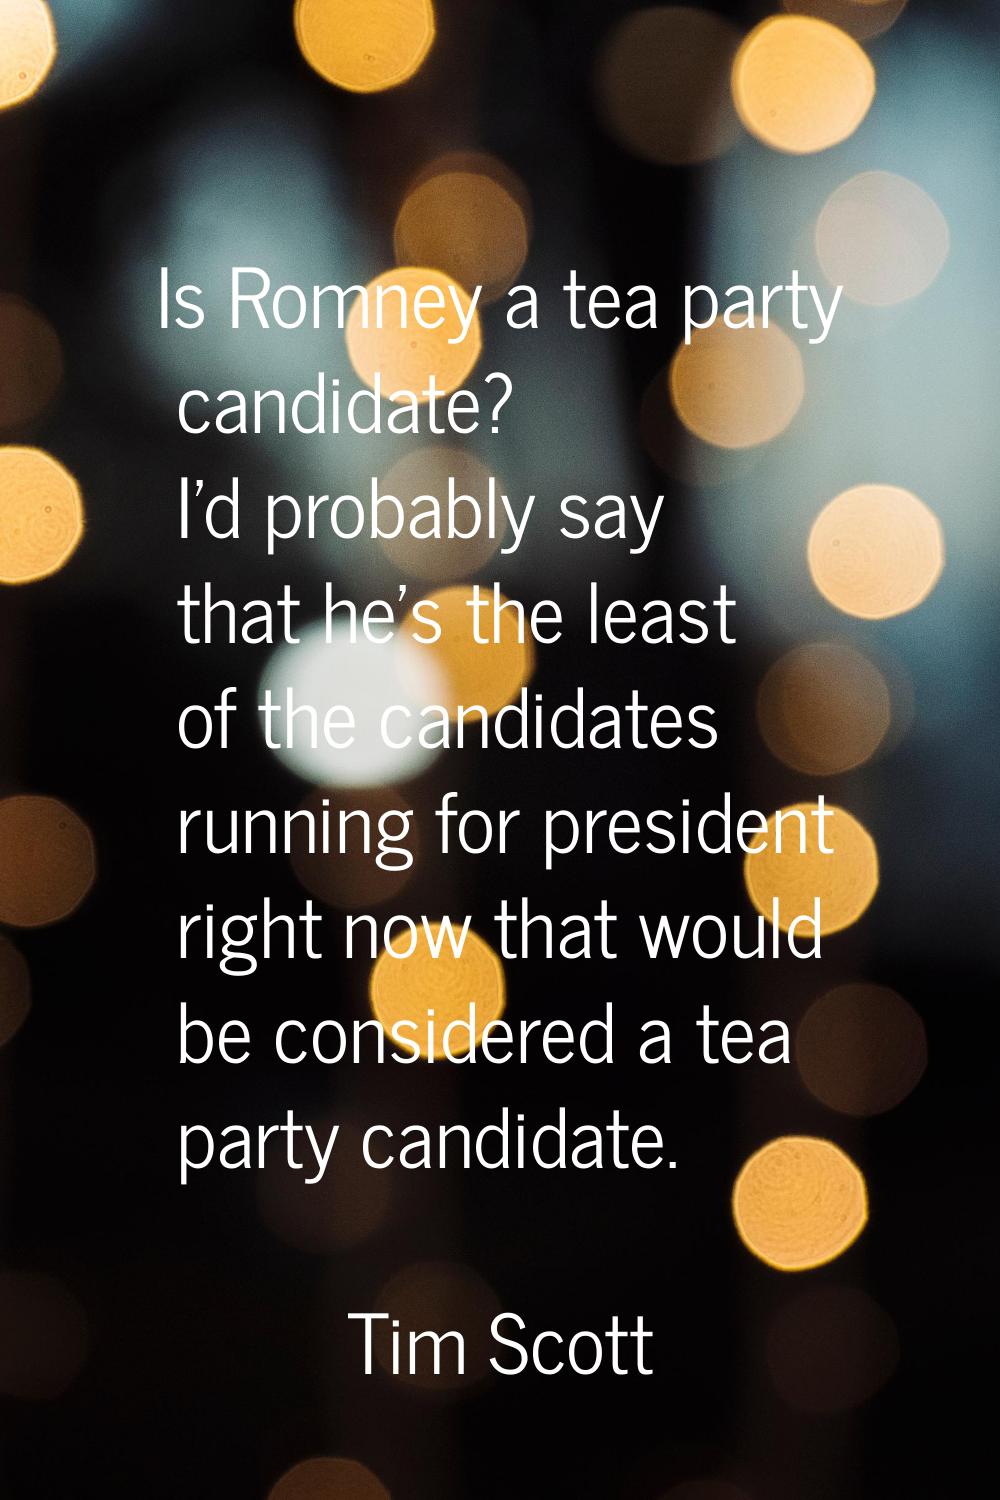 Is Romney a tea party candidate? I'd probably say that he's the least of the candidates running for